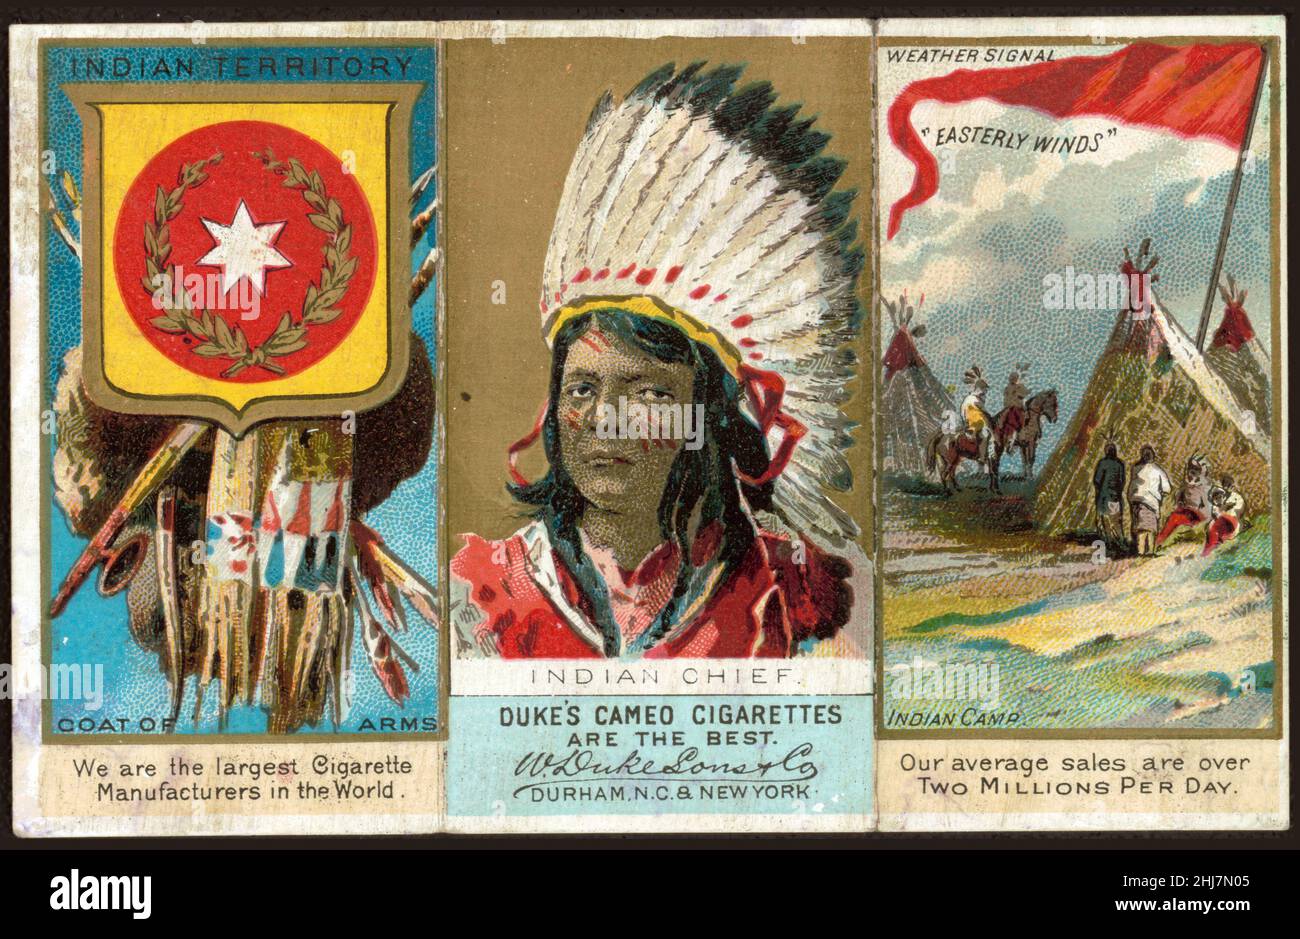 Indian territory - Antique and vintage illustration - Native american / Indian / American Indian 1885, cigarette advert, Duke's Cameo Cigarettes Stock Photo